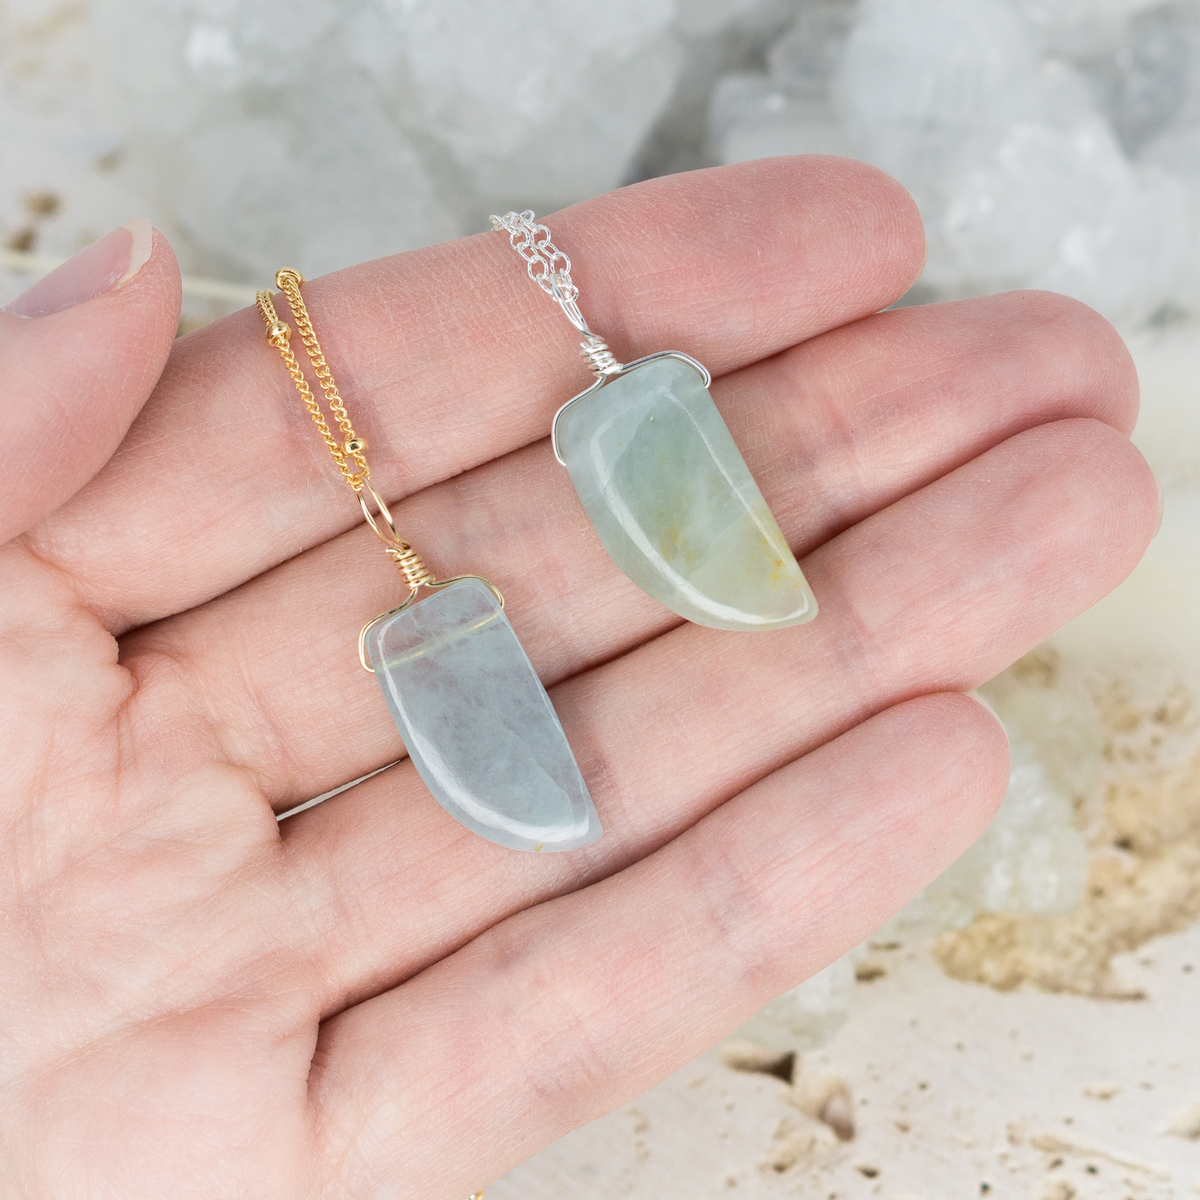 Small Smooth Aquamarine Gentle Point Crystal Pendant Necklace